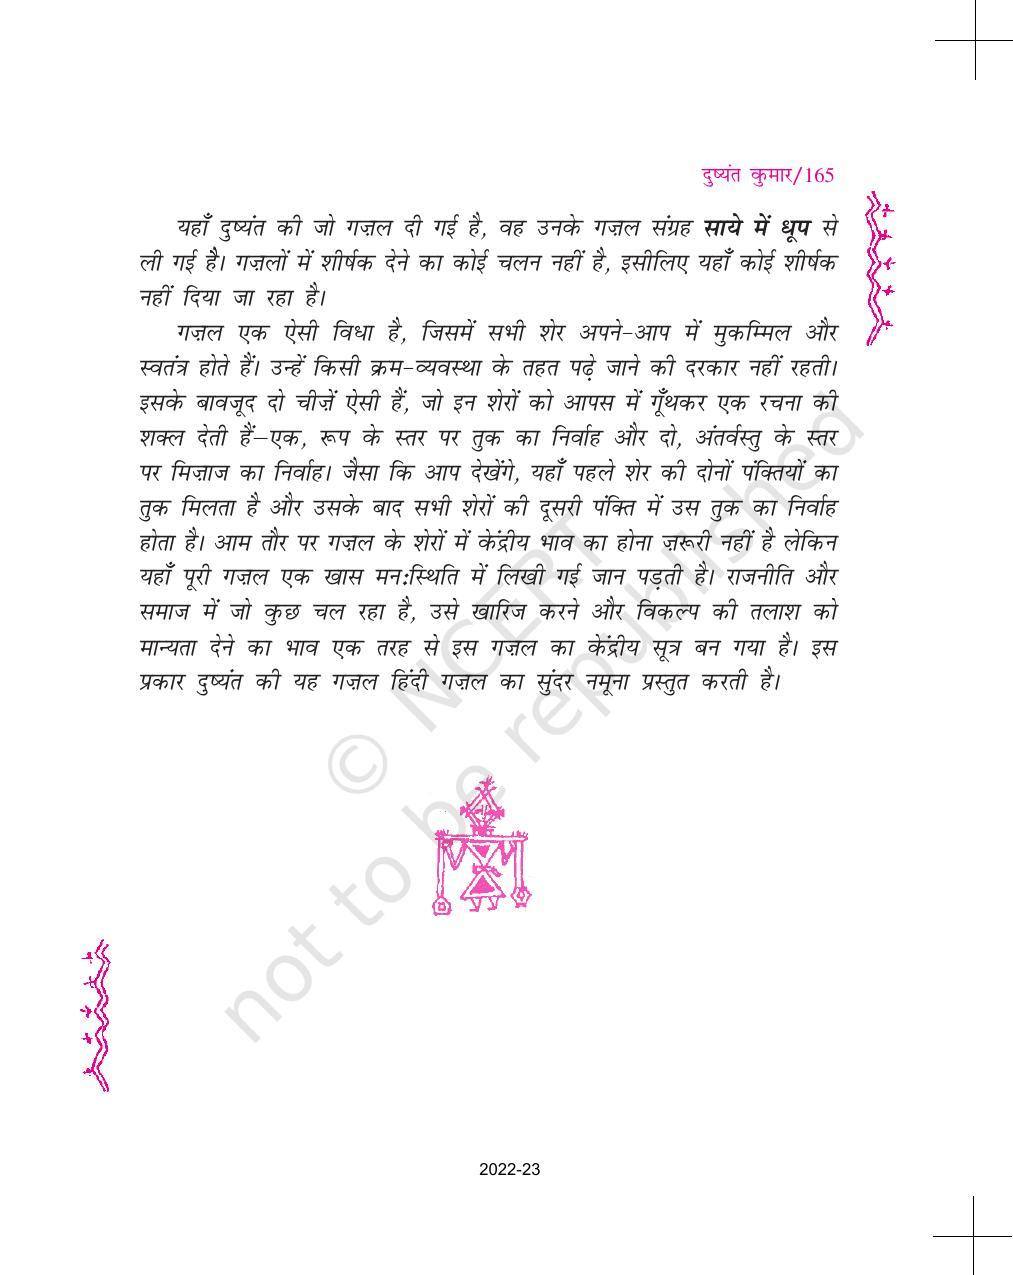 NCERT Book for Class 11 Hindi Aroh Chapter 17 दुष्यंत कुमार - Page 2